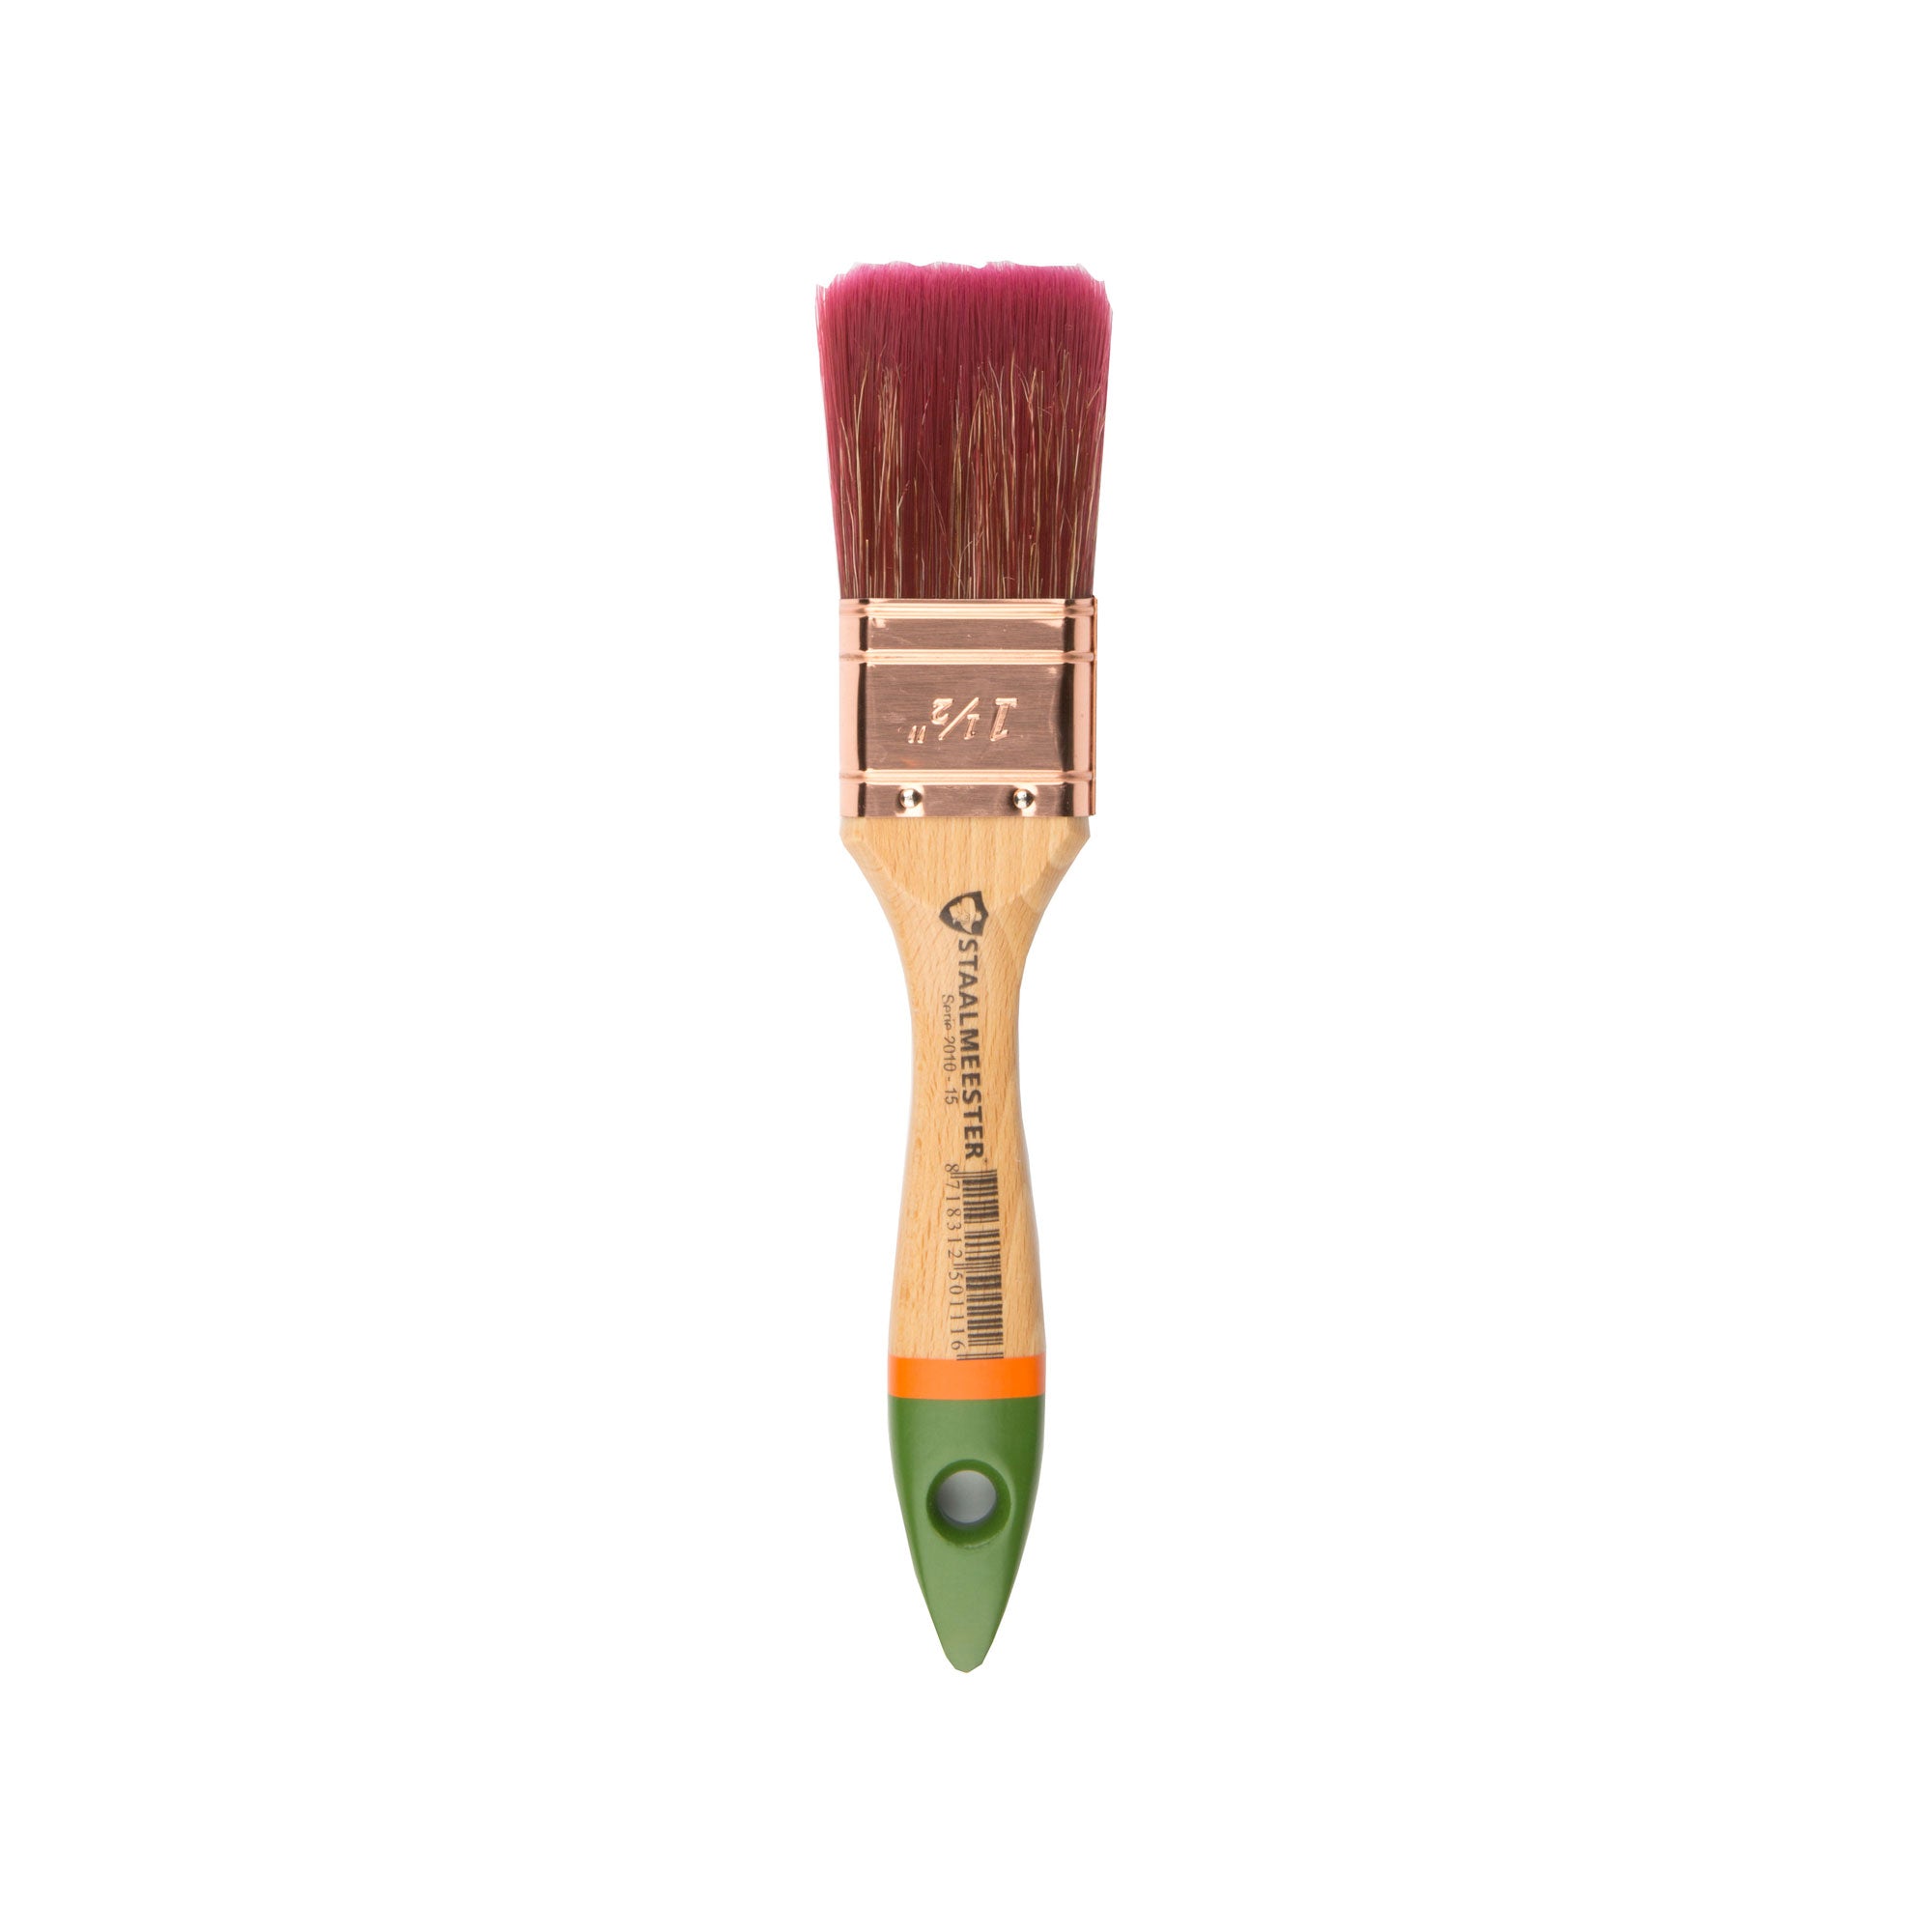 Fusion_Mineral_Paint_Staalmeester_15_Flat_Synthetic_Natural_Fiber_Brush.jpg